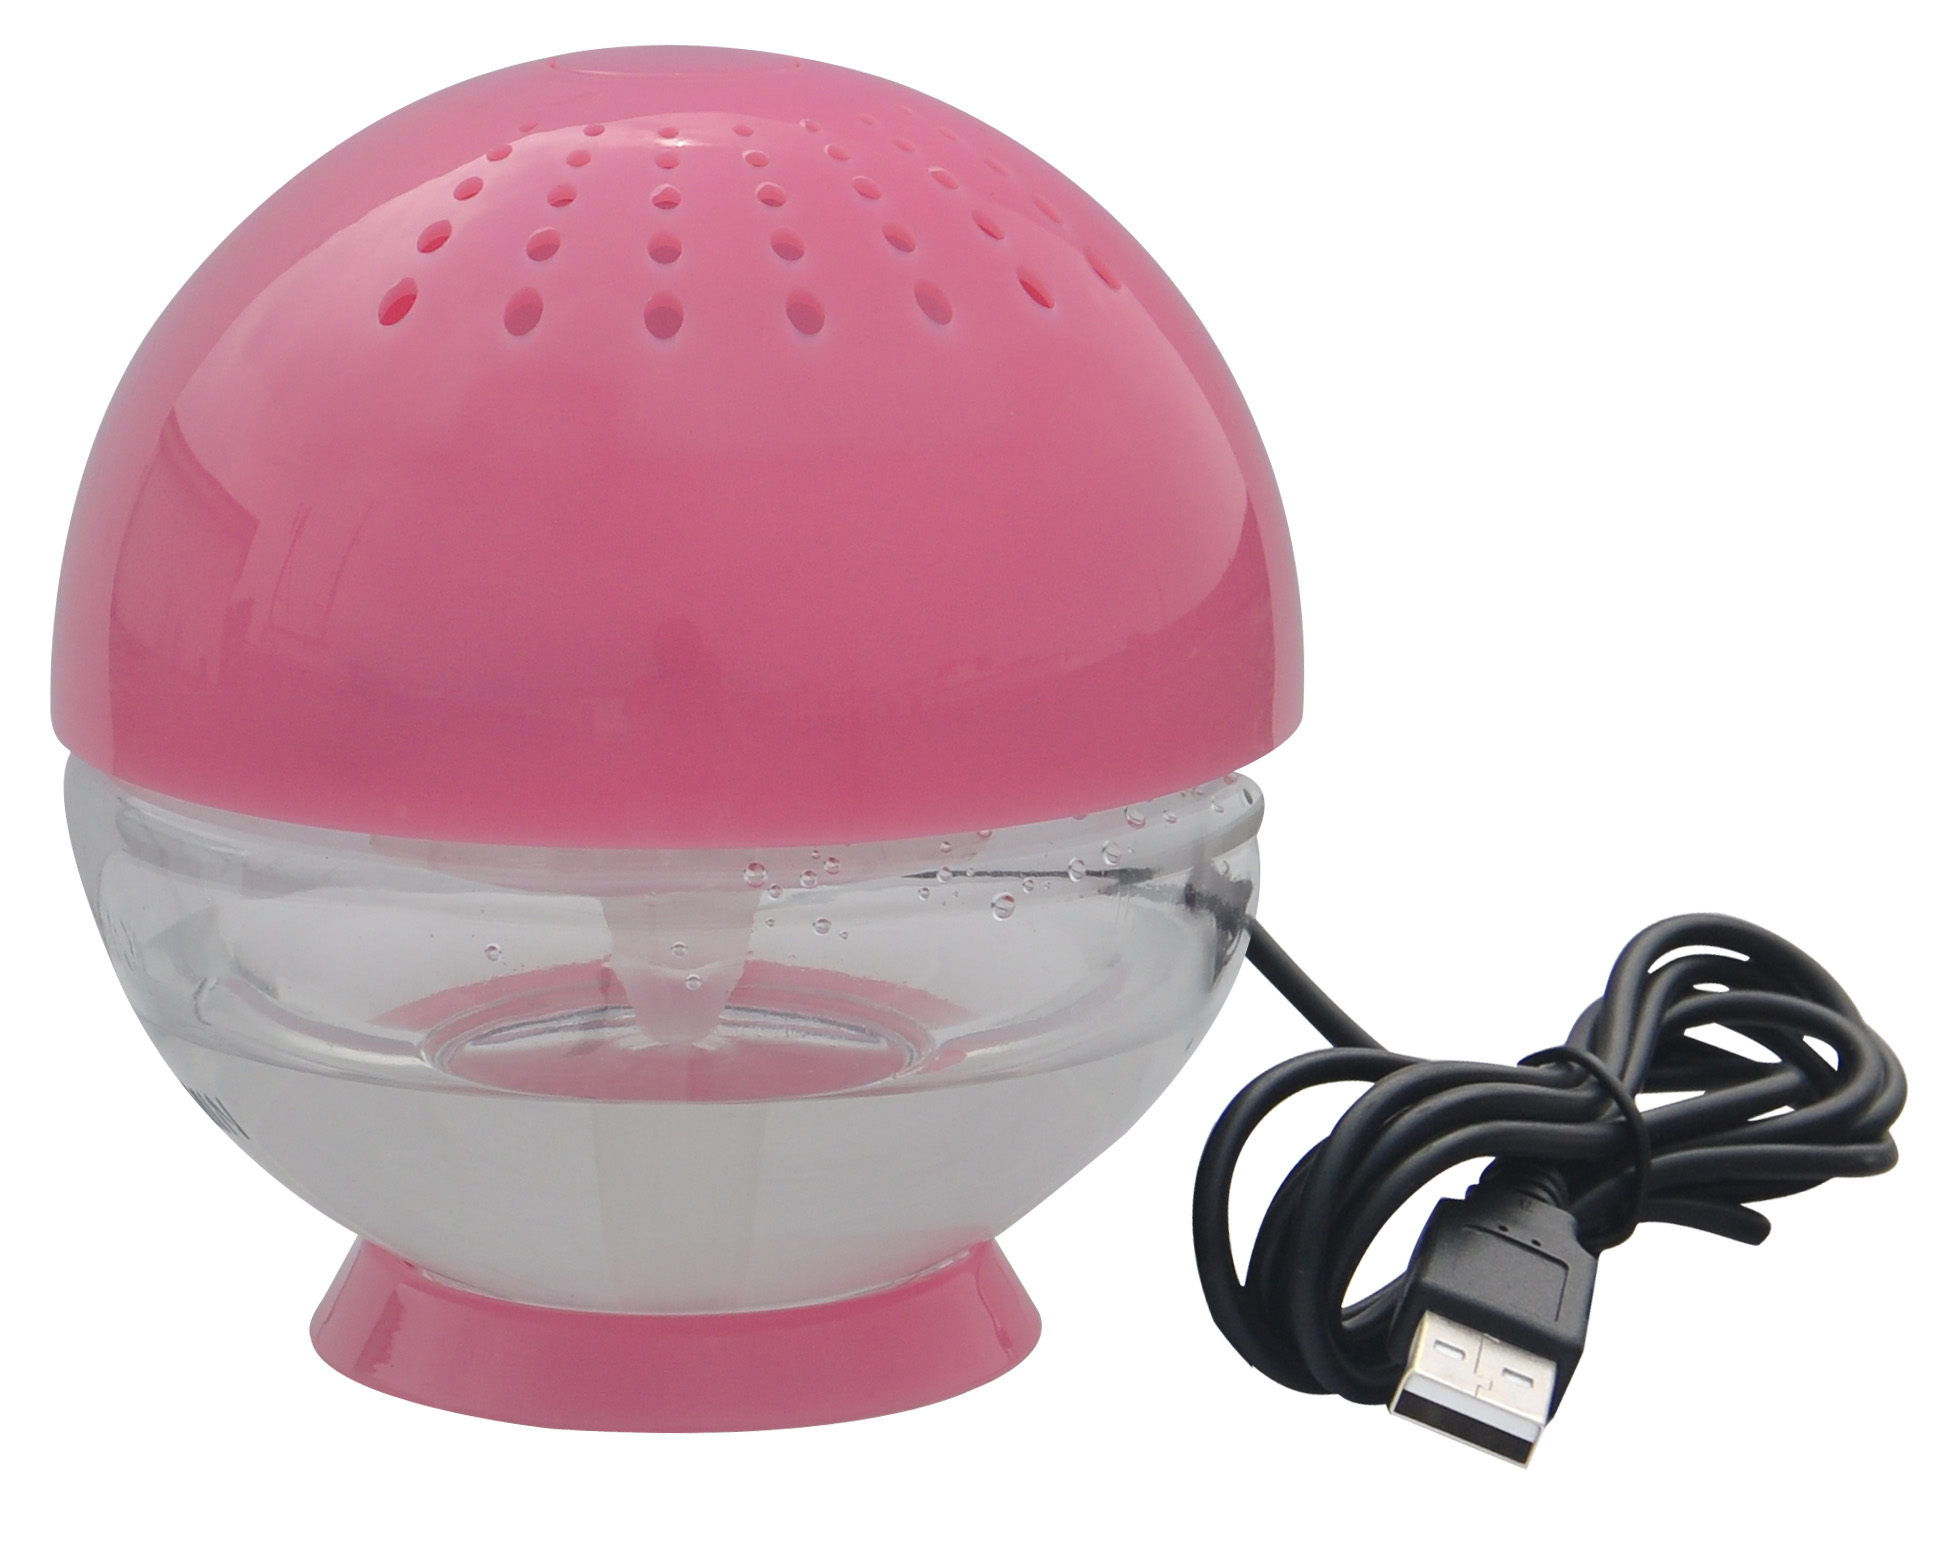 USB Plastic Cover Water Air Revitalizer,Small Water Based Air Revitalisor,Ball Round Shaped Air Purifier